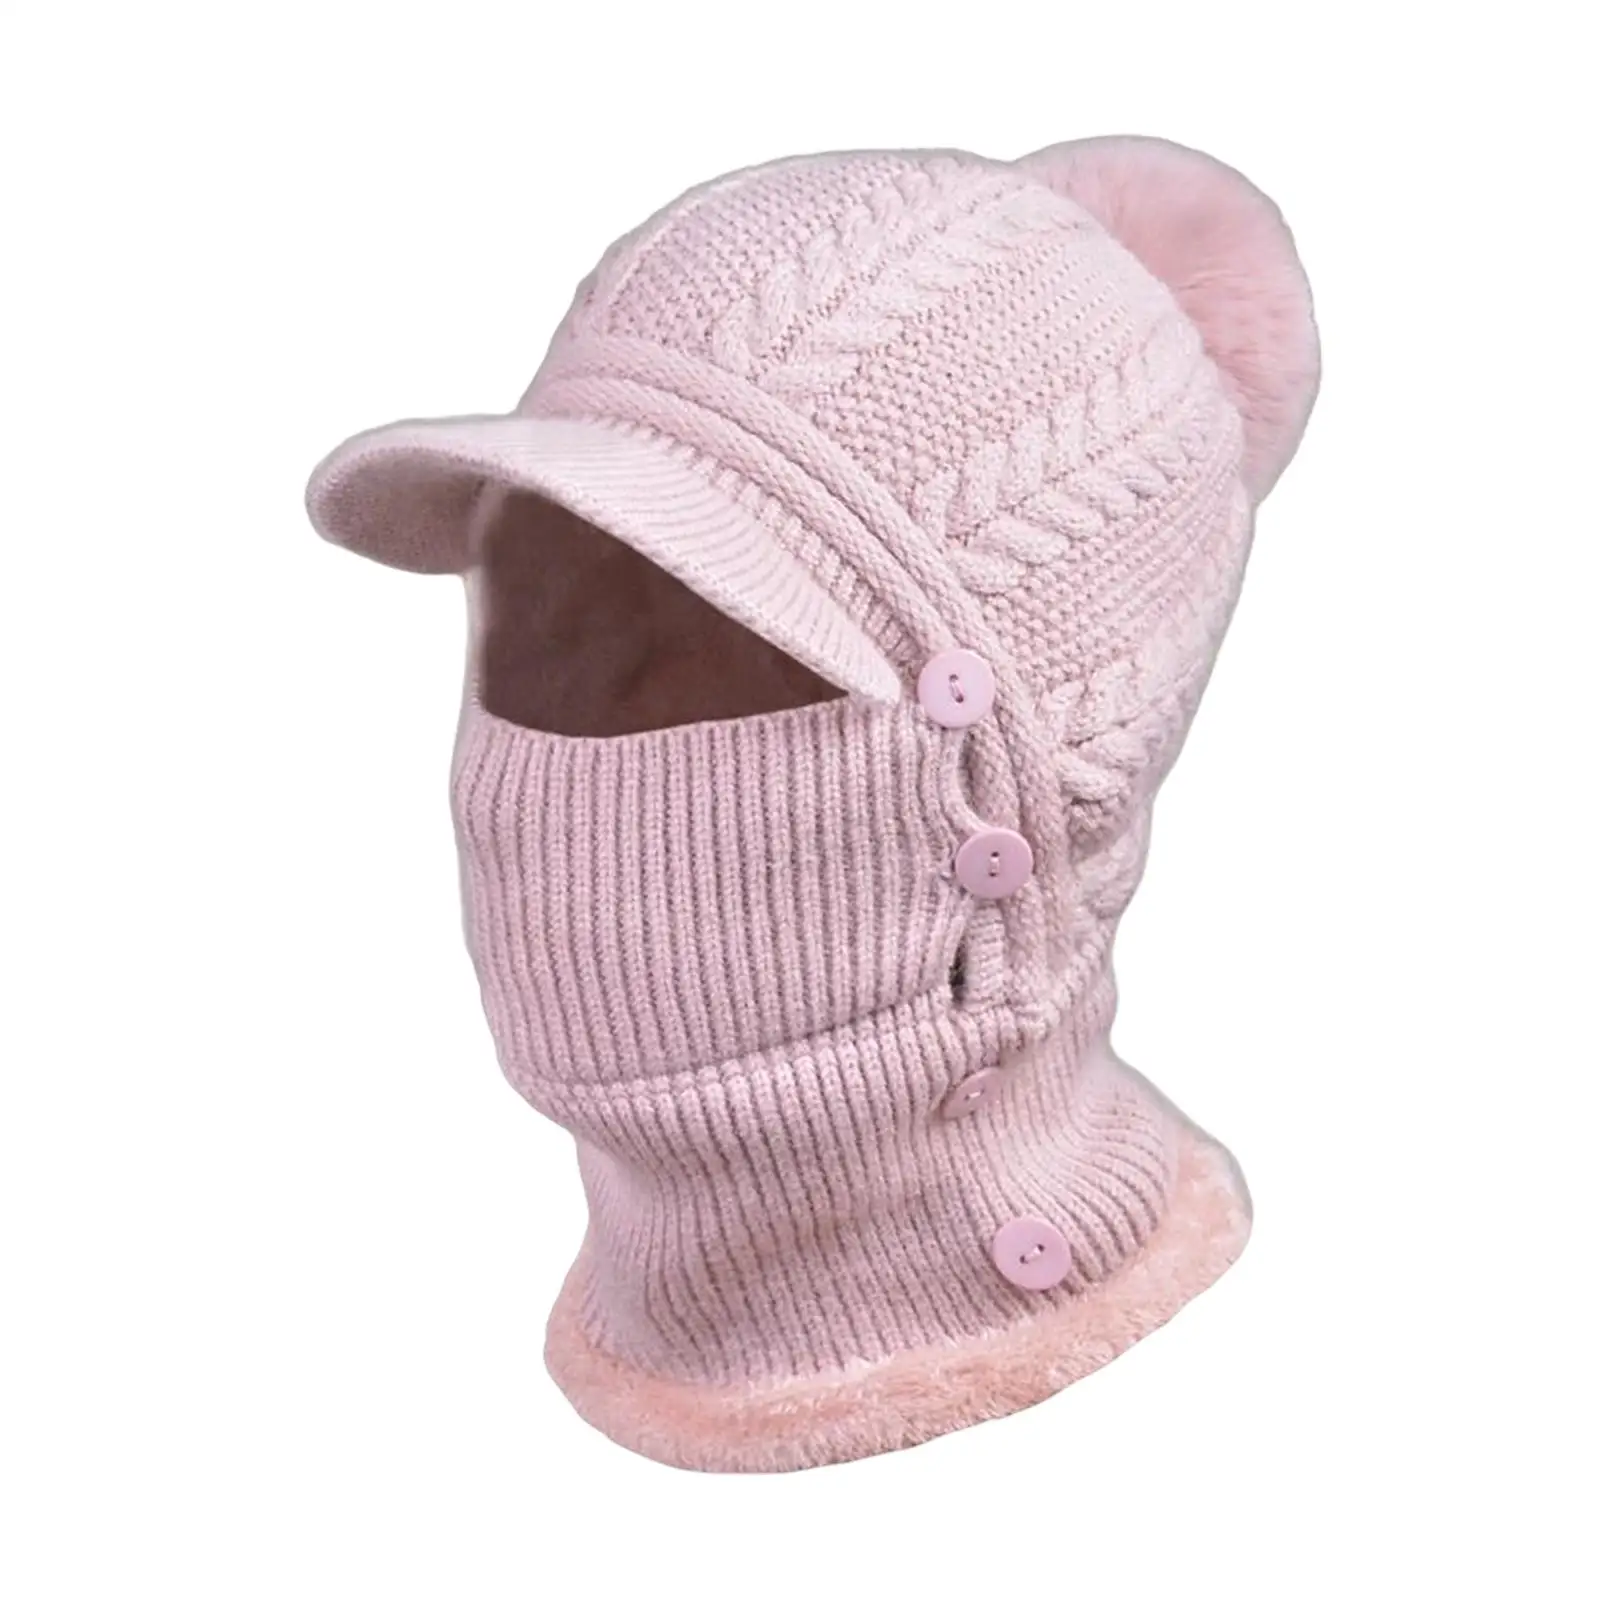 Thermal Knit Balaclava Beanie Hat Neck Scarf Button Hat Winter Ski Mask Cap for Running Skiing Motorcycle Backpacking Camping